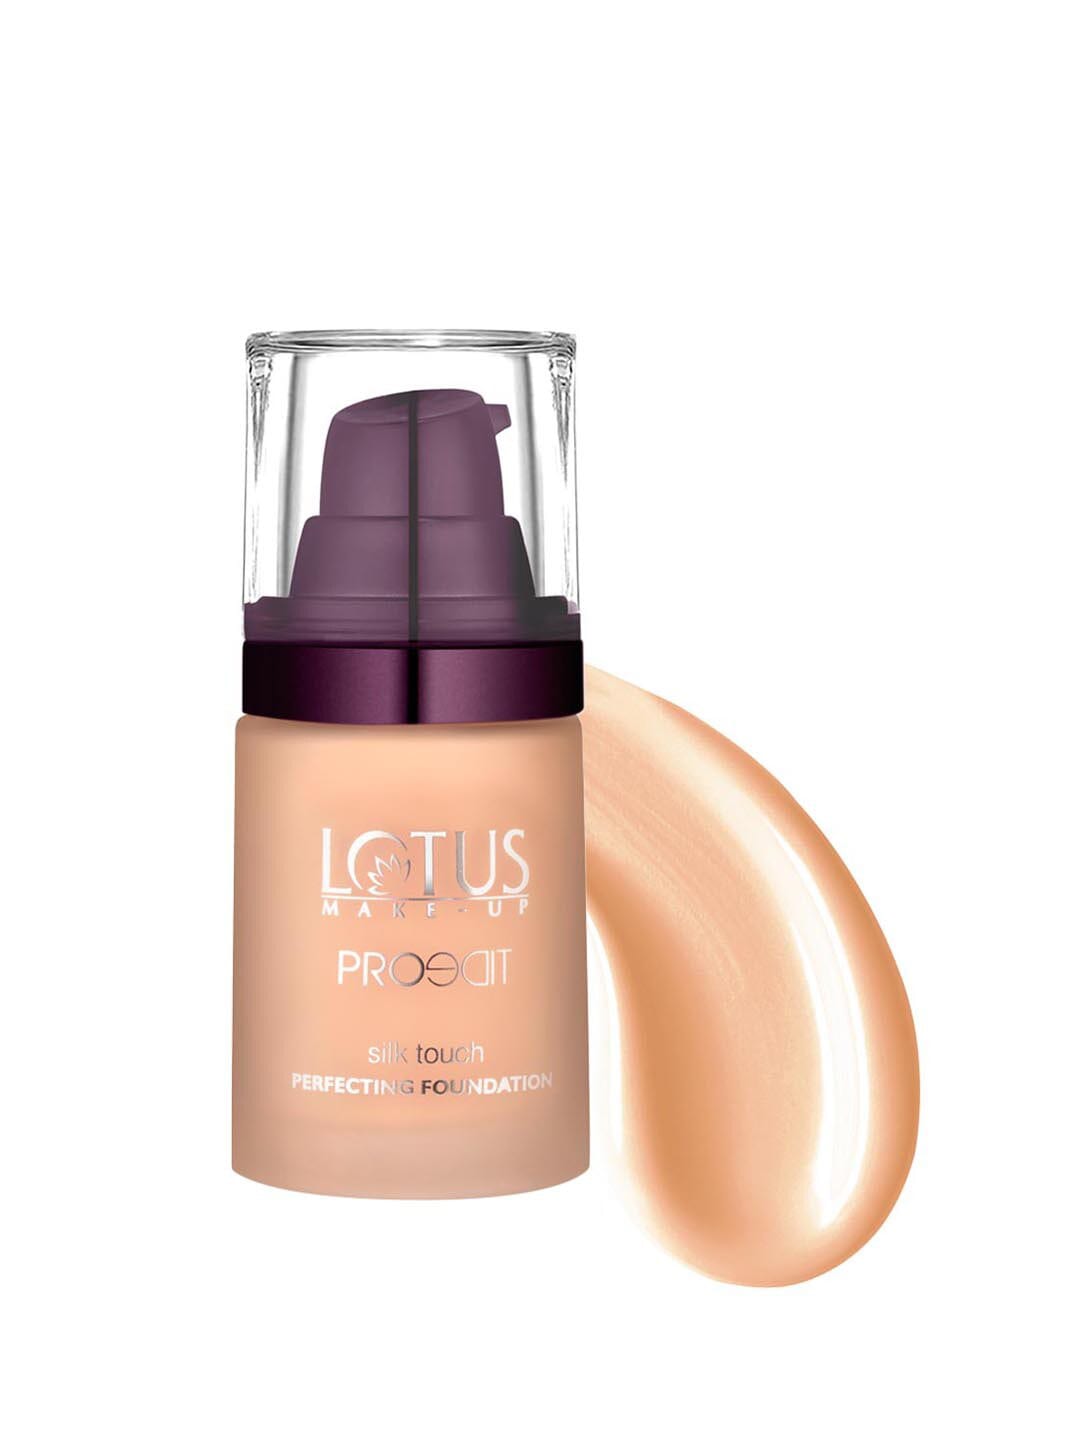 Lotus Herbals Sustainable Make-Up Proedit Silk Touch Perfecting Foundation - Cocoa SF05 30ml Price in India